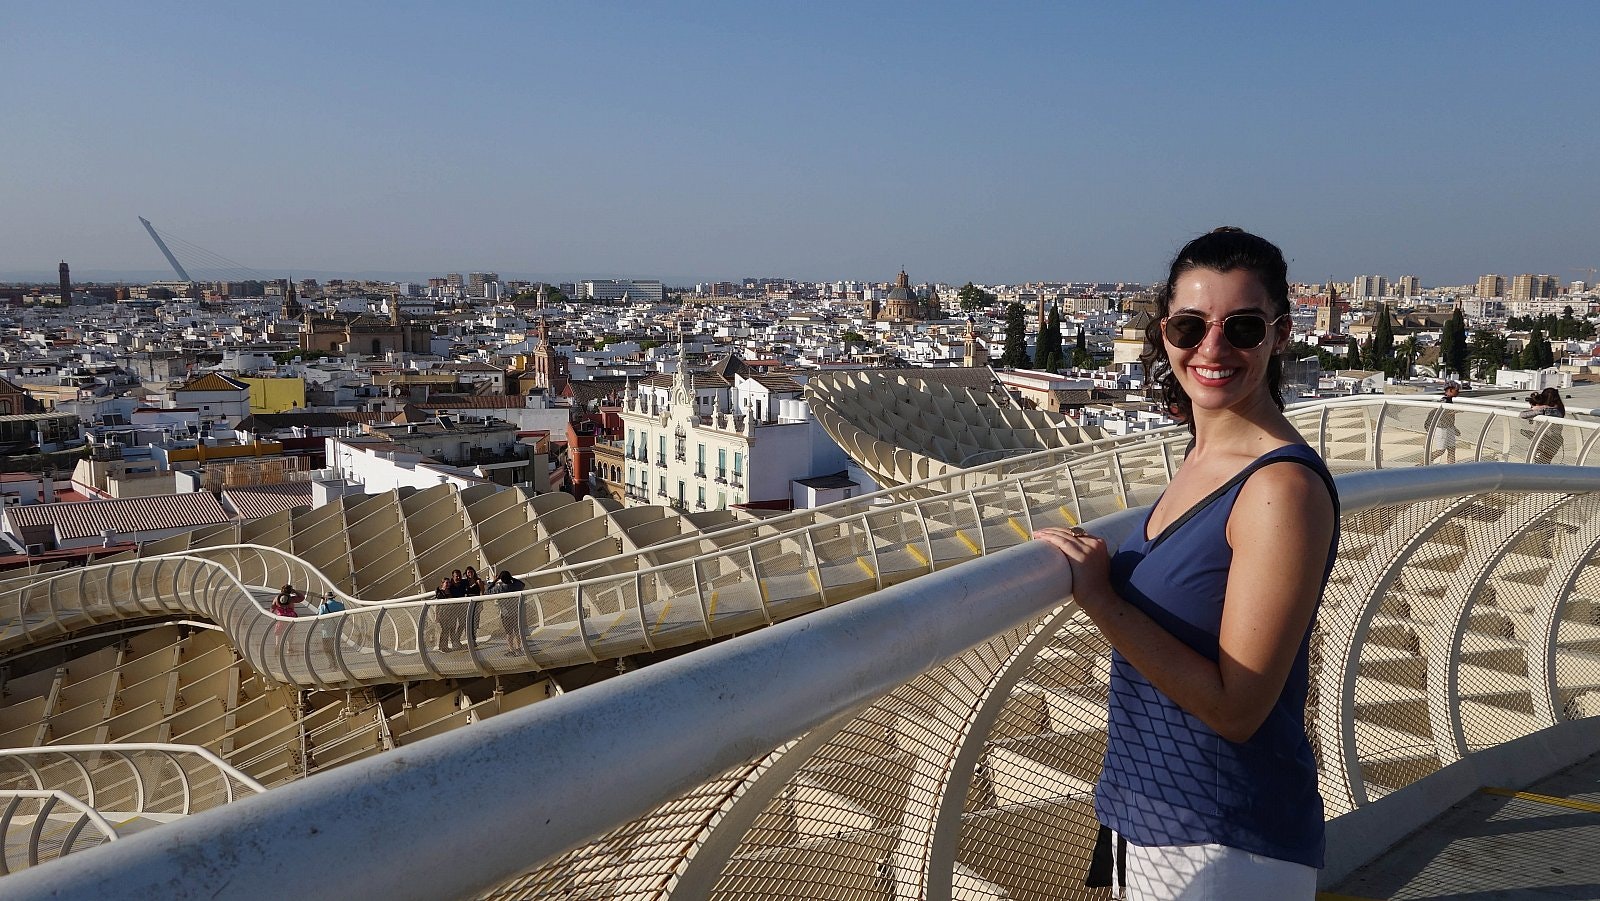 Writer Caterina stands on the undulating wooden walkway atop the Metropol Parasol, wearing sunglasses and smiling with the Seville skyline behind her.